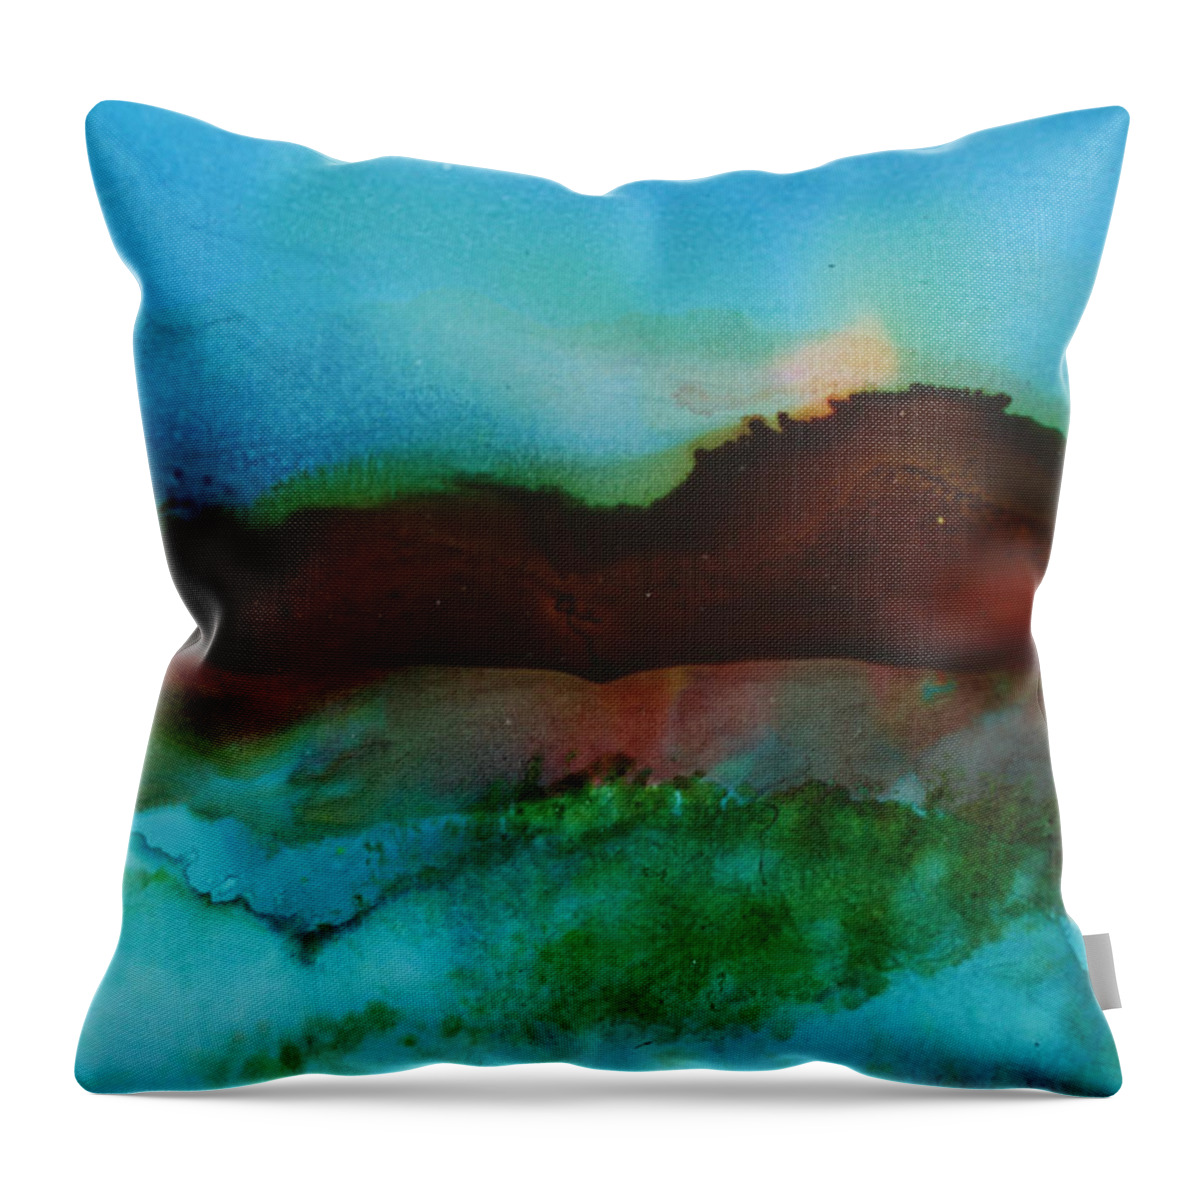 Abstract Landscape Throw Pillow featuring the painting Abstract Landscape by Sandra Fox